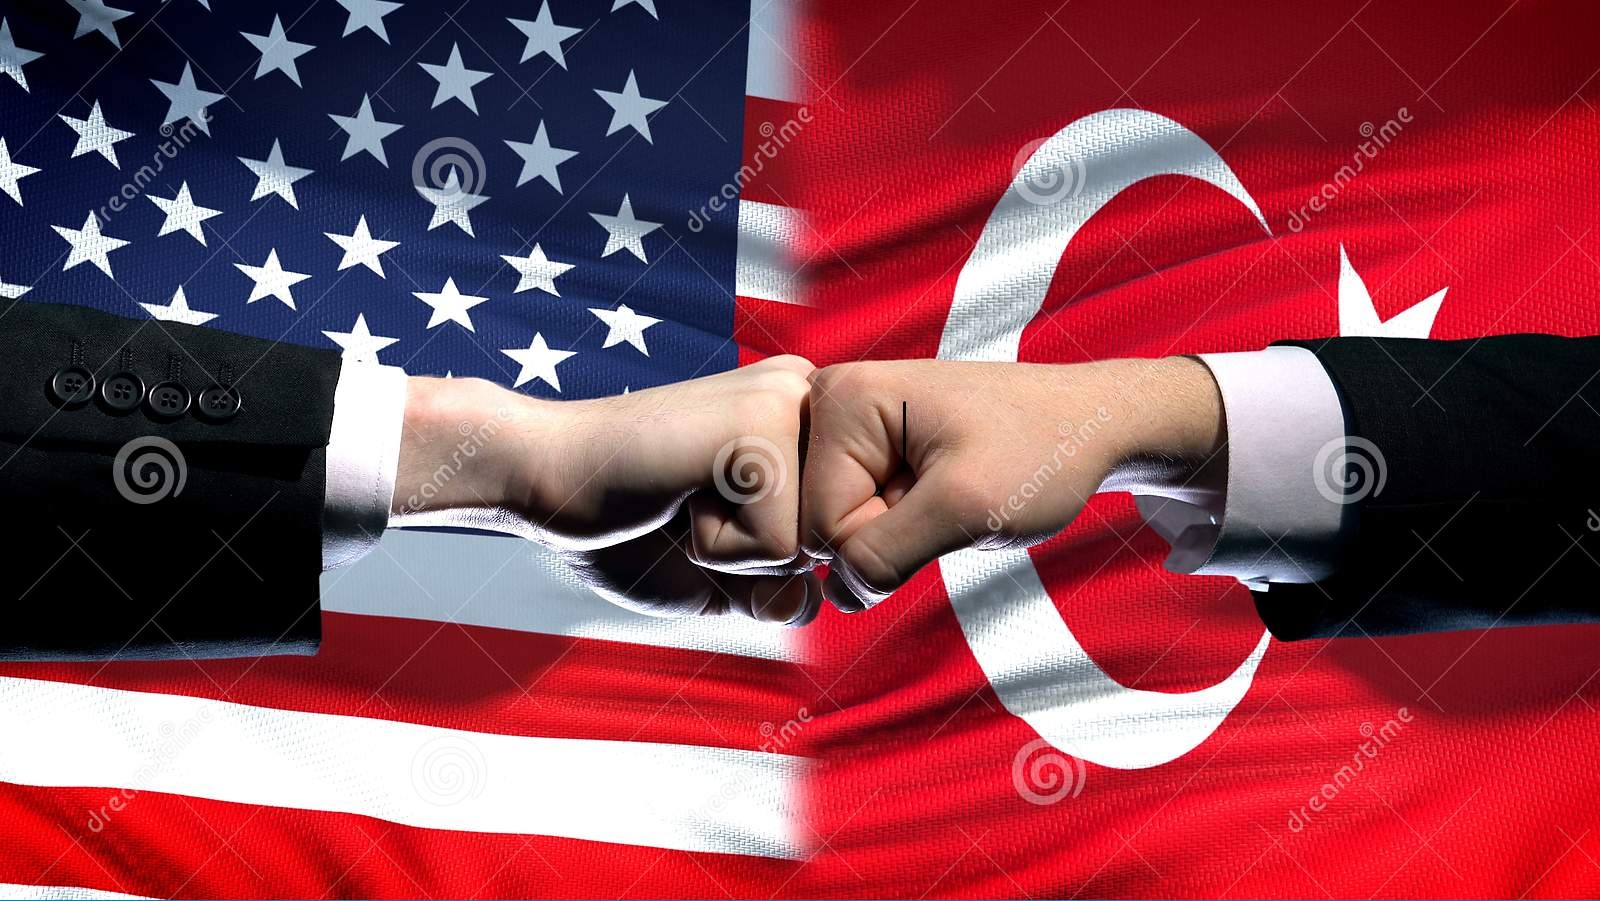 Turkey has 2 weeks to cancel Russian arms deal and avoid US penalties